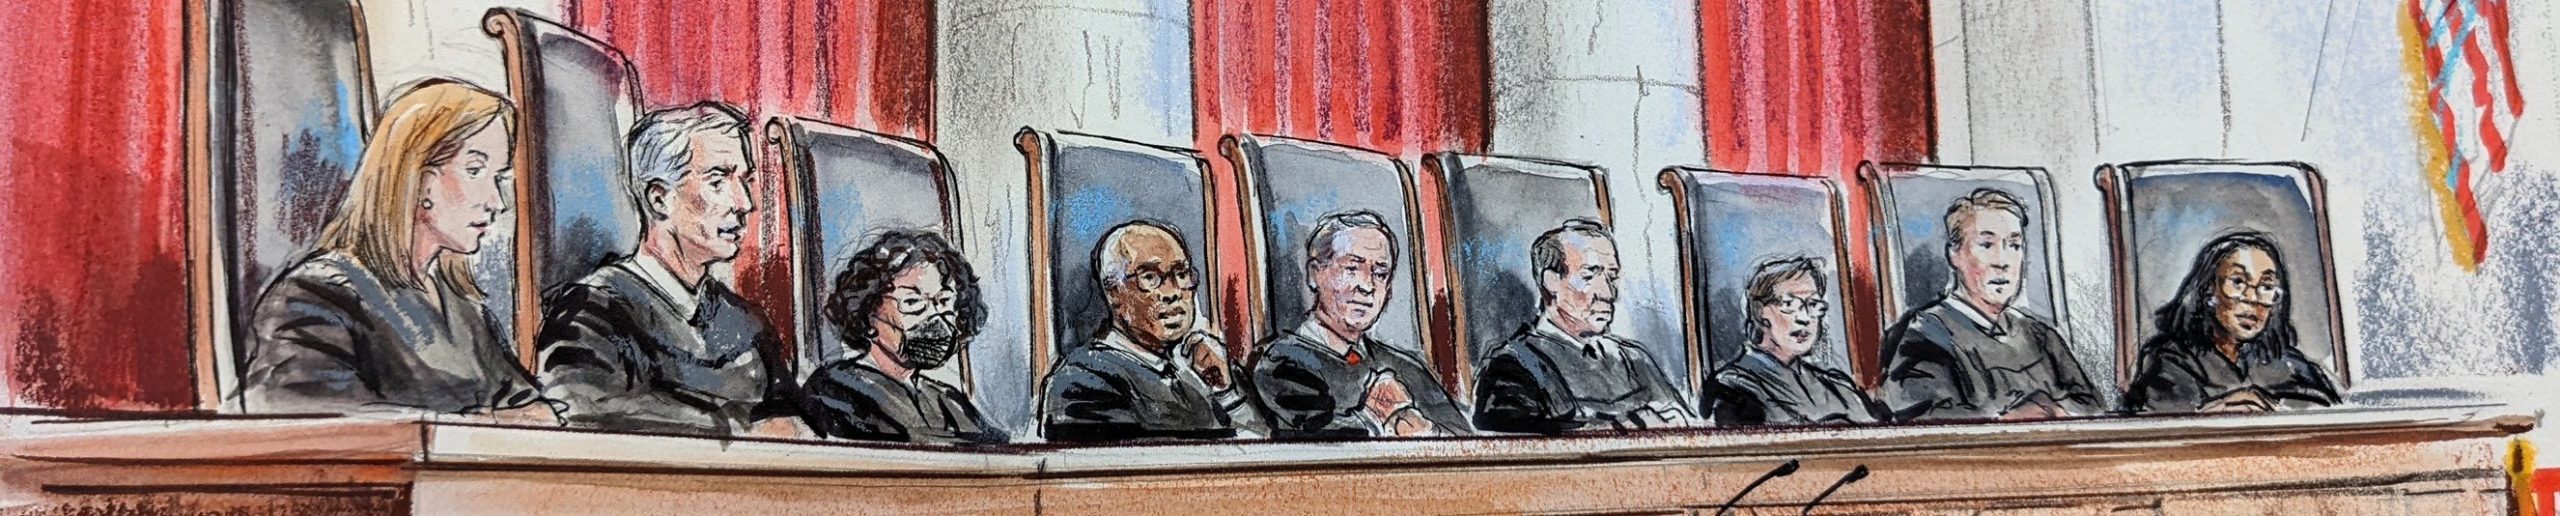 artist's rendition of nine justices in robes sitting behind judicial bench, looking out over an empty lectern. sonia sotomayor wears a mask. large curtains and an american flag hang in the background.